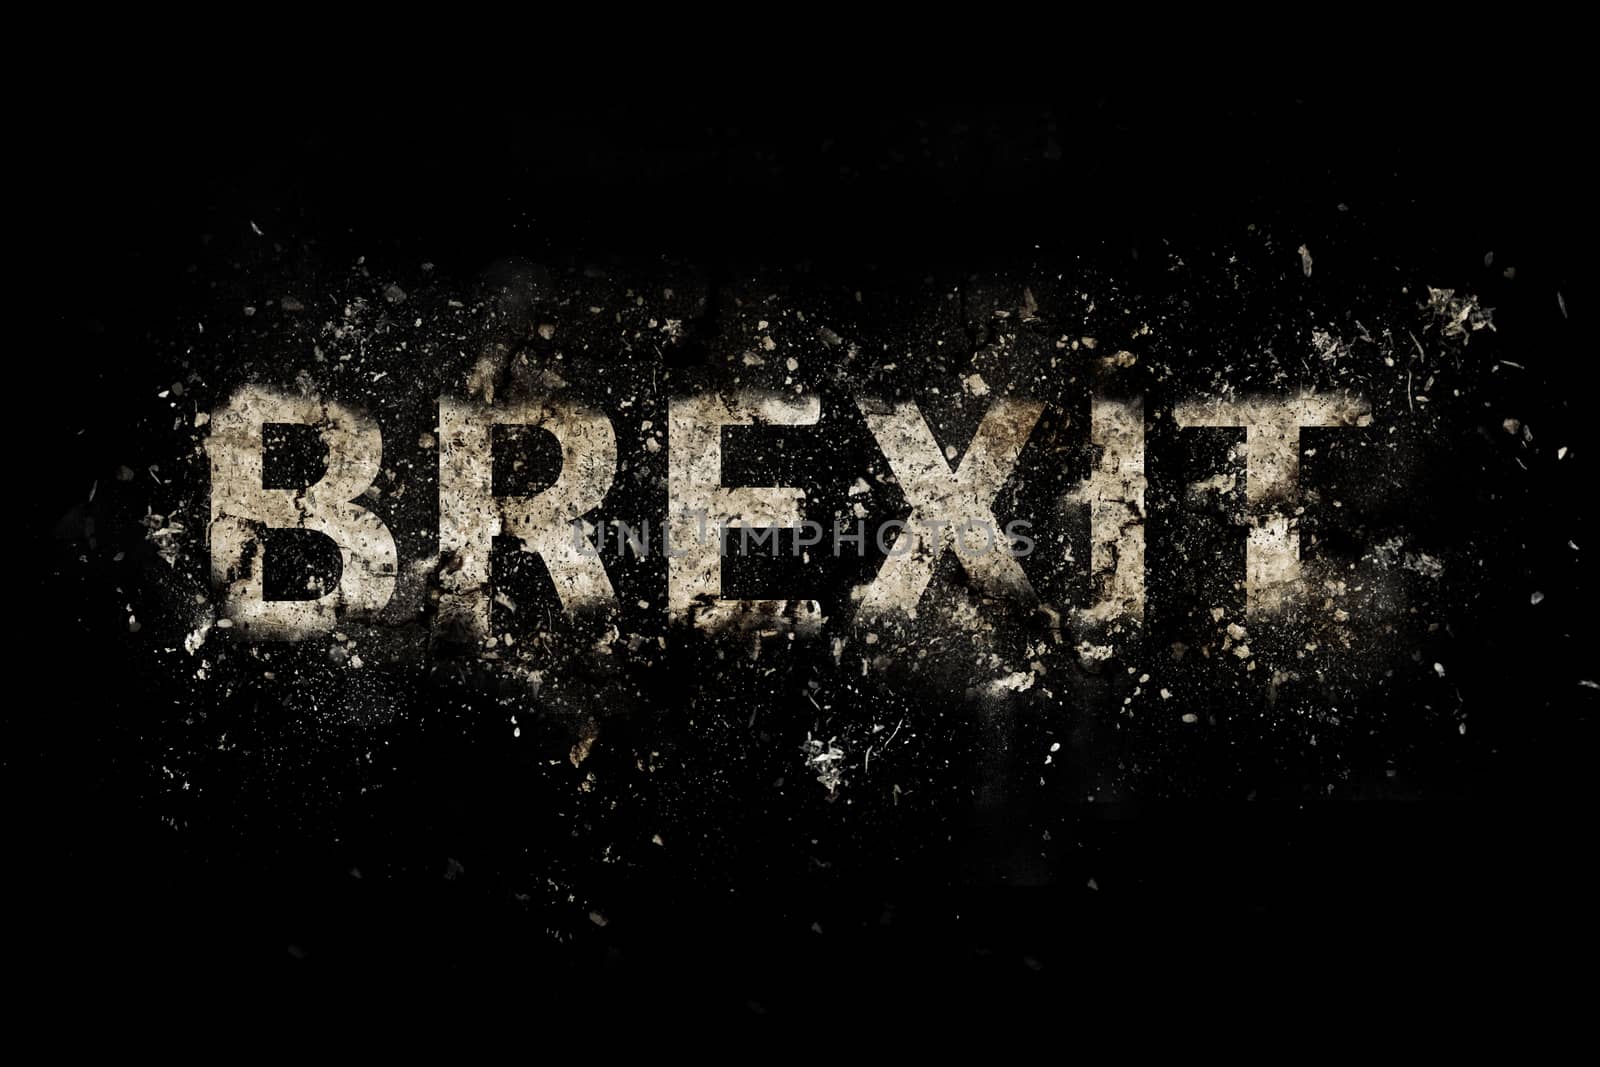 Exploding Brexit Text by magicbones